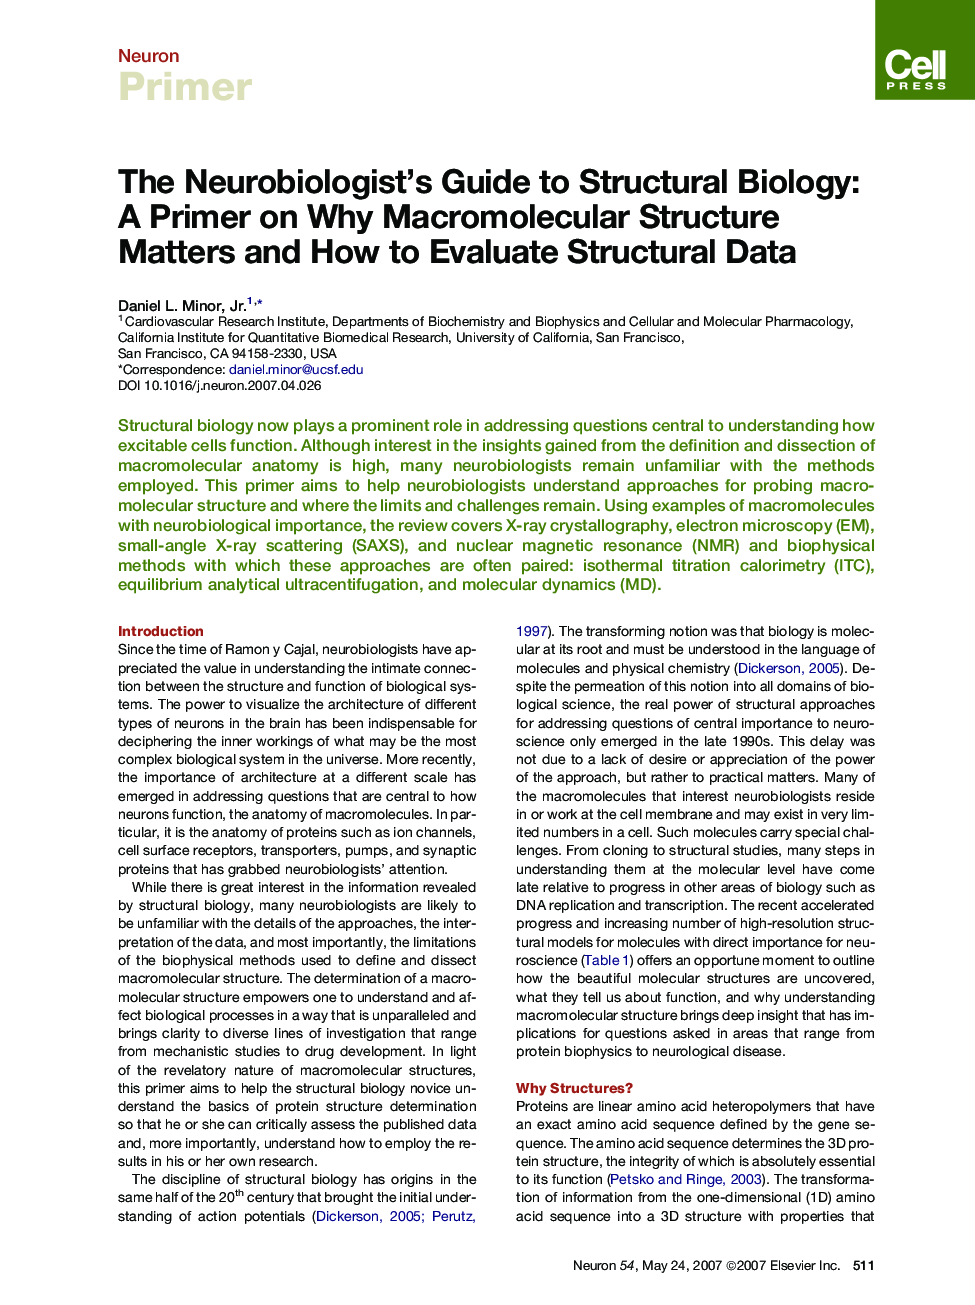 The Neurobiologist's Guide to Structural Biology: A Primer on Why Macromolecular Structure Matters and How to Evaluate Structural Data